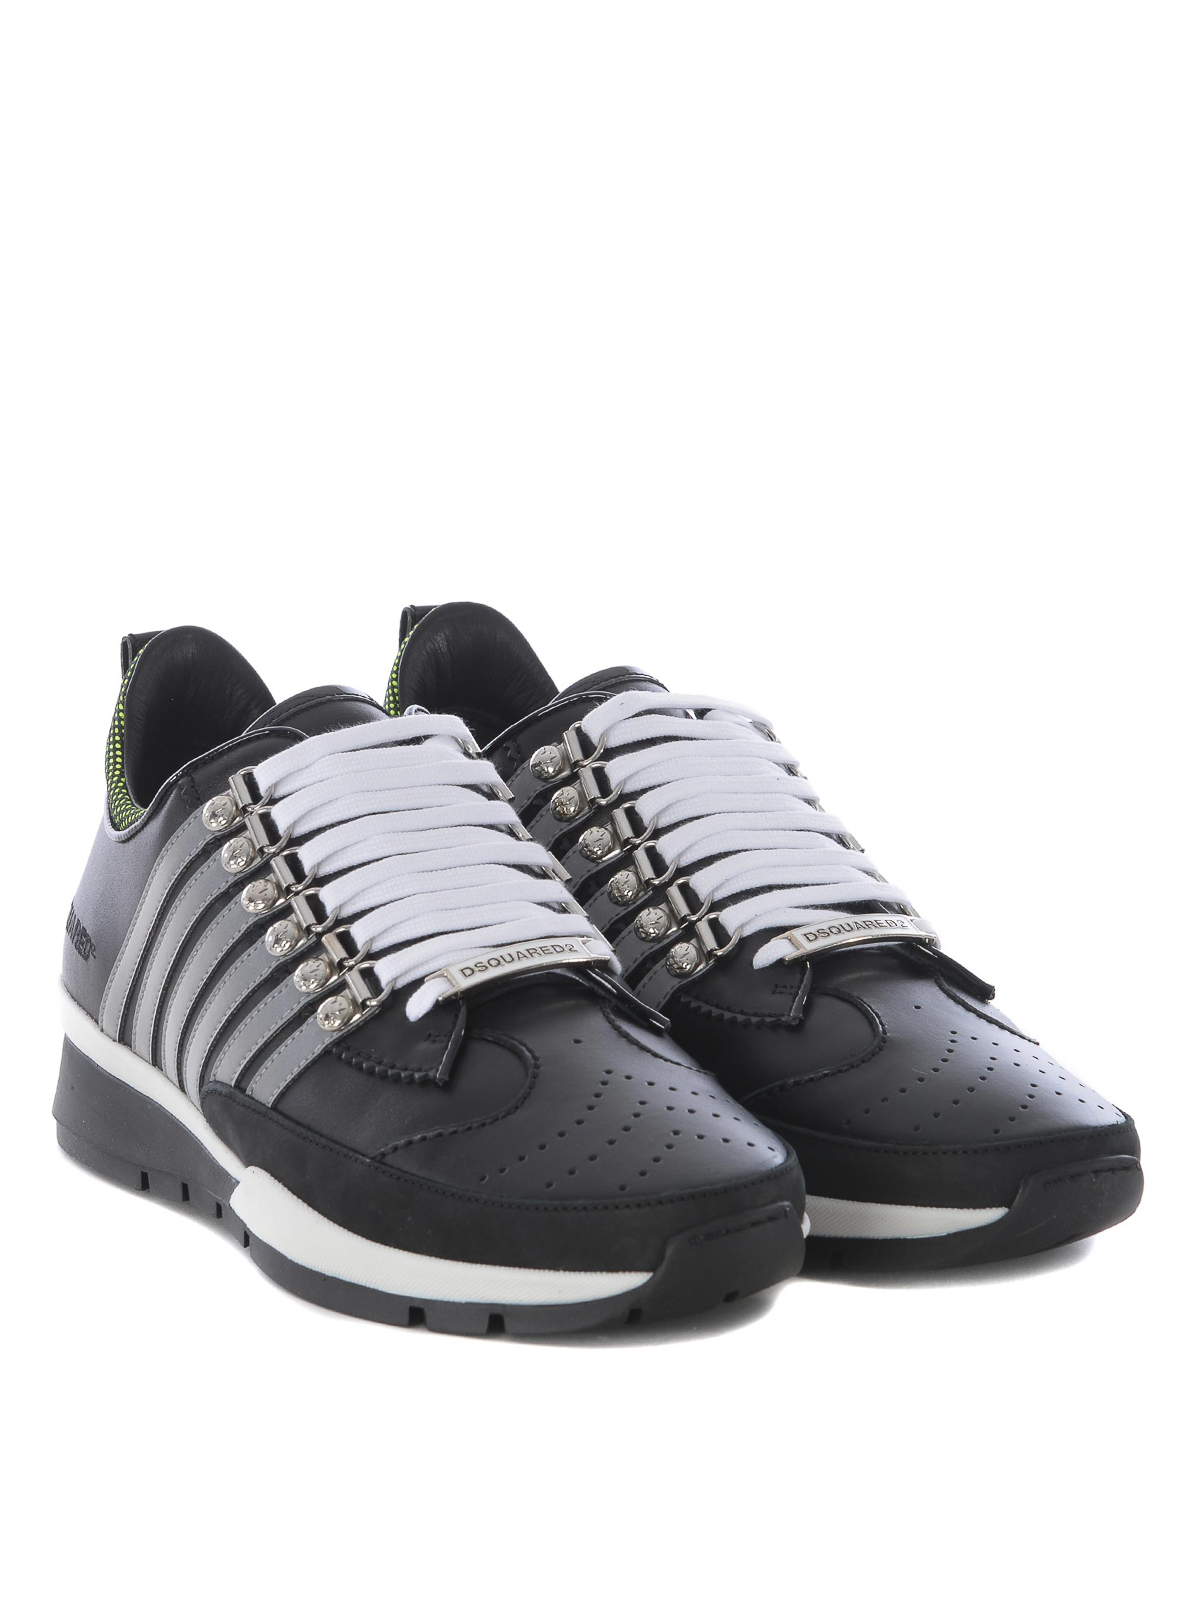 Dsquared2 251 sneakers with reflective stripes SNM01011680M1634